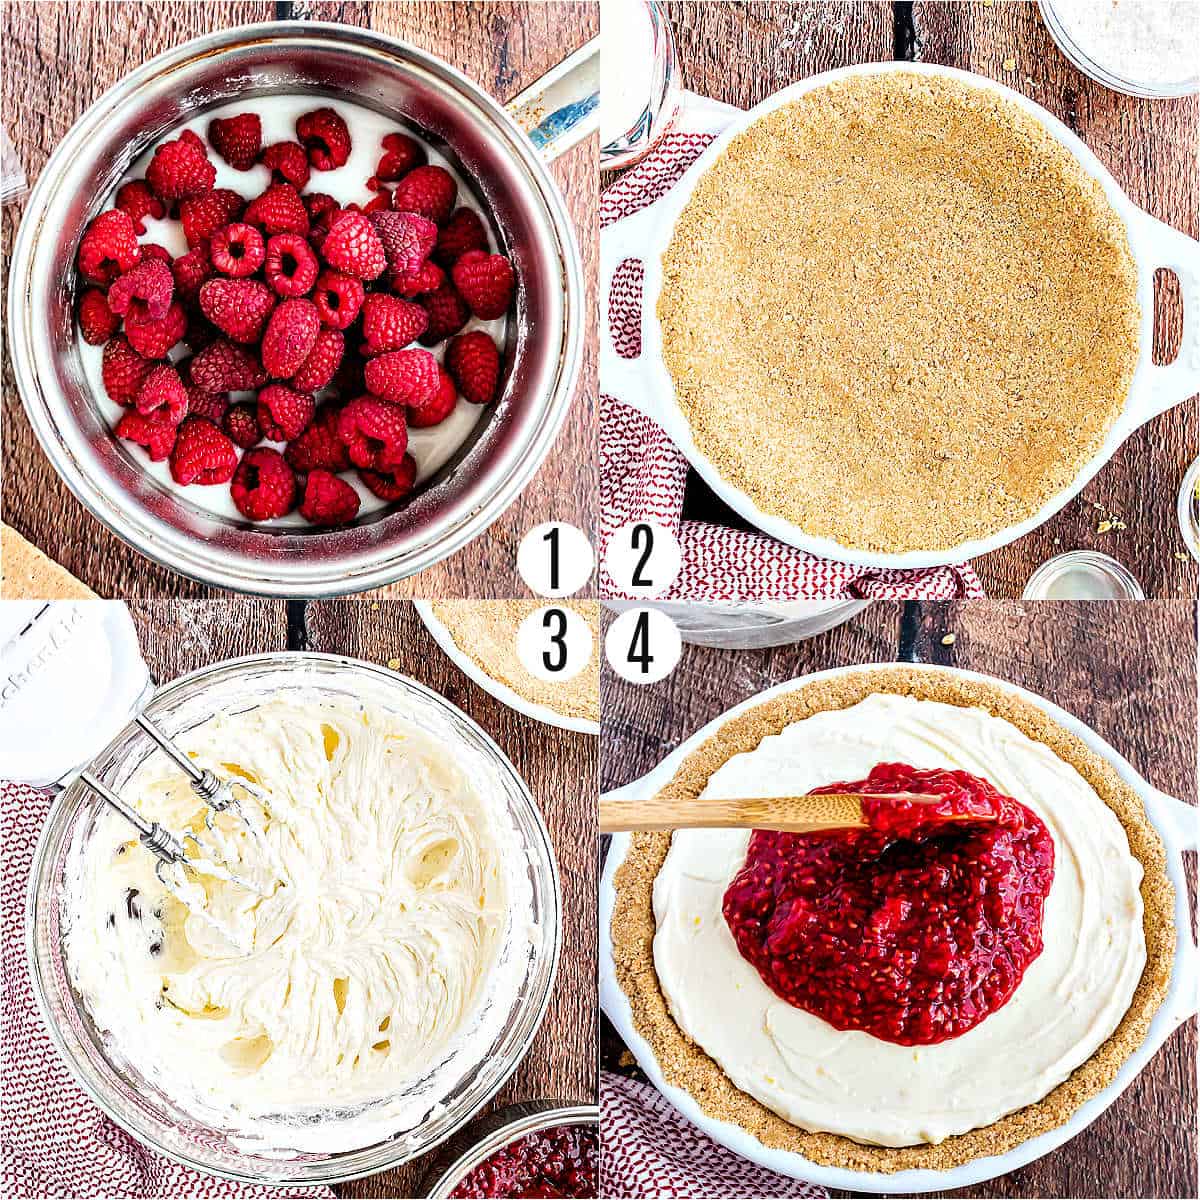 Step by step photos showing how to make raspberry cheesecake.